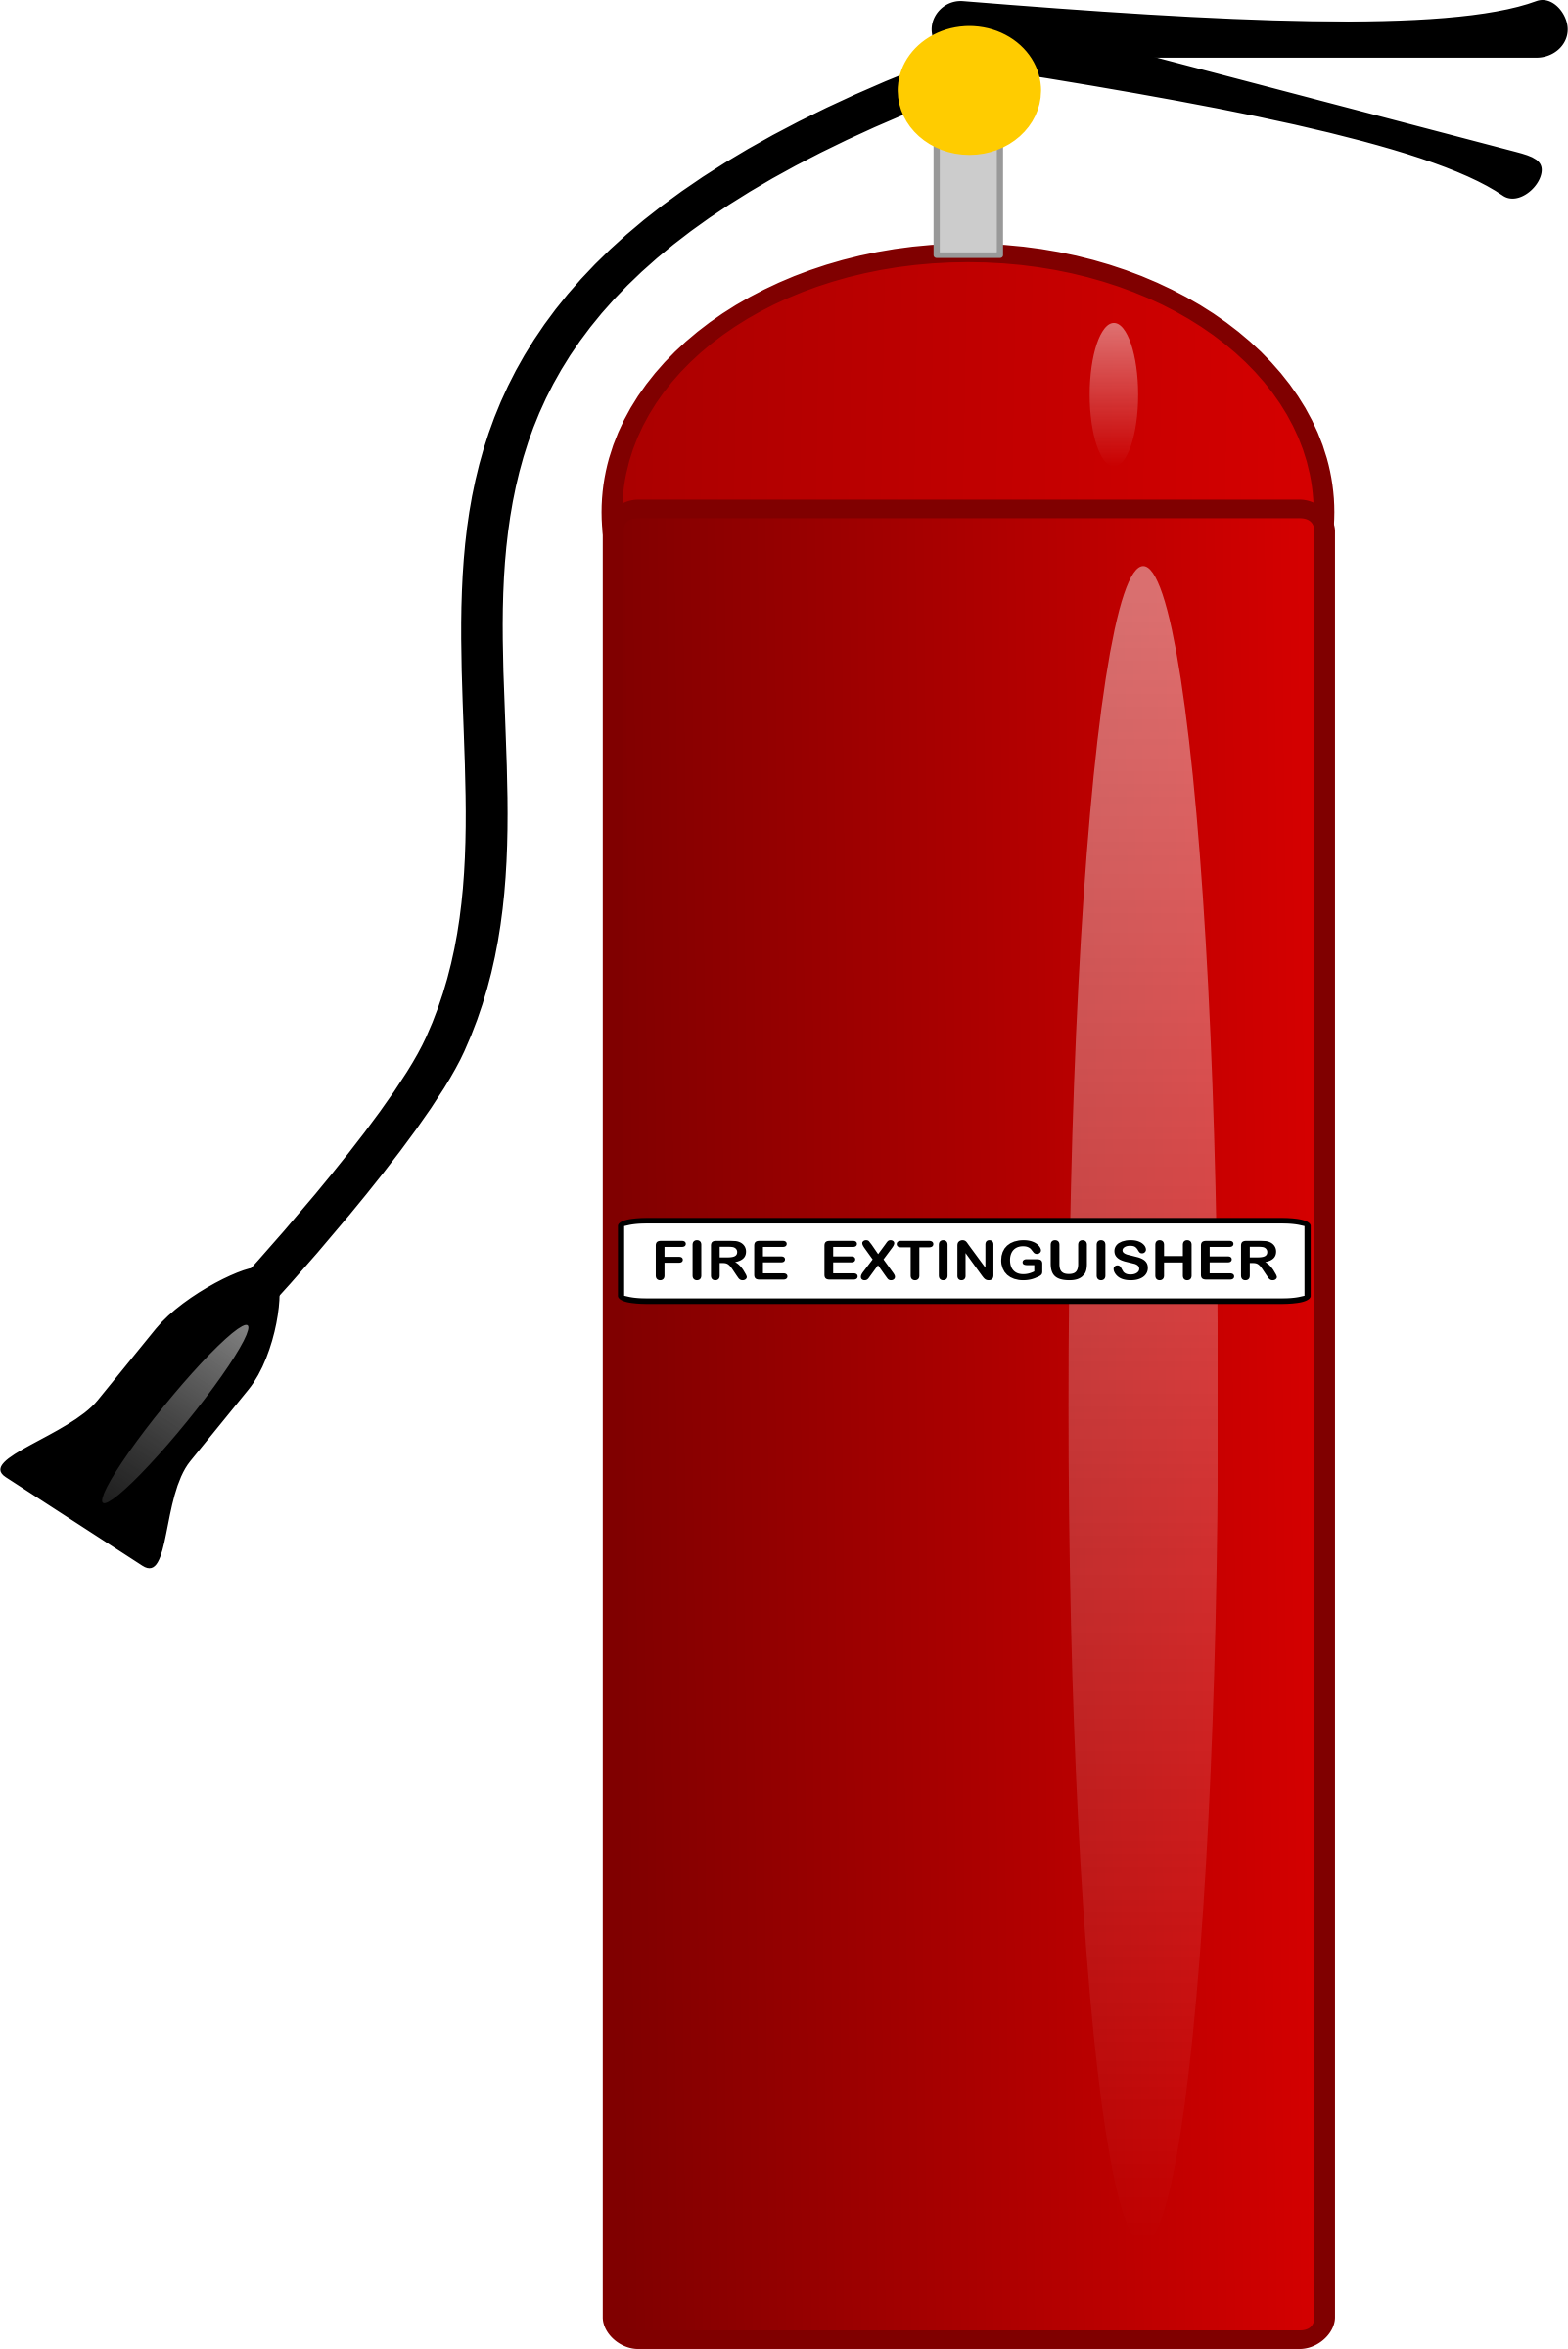 Fire extinguisher clipart images